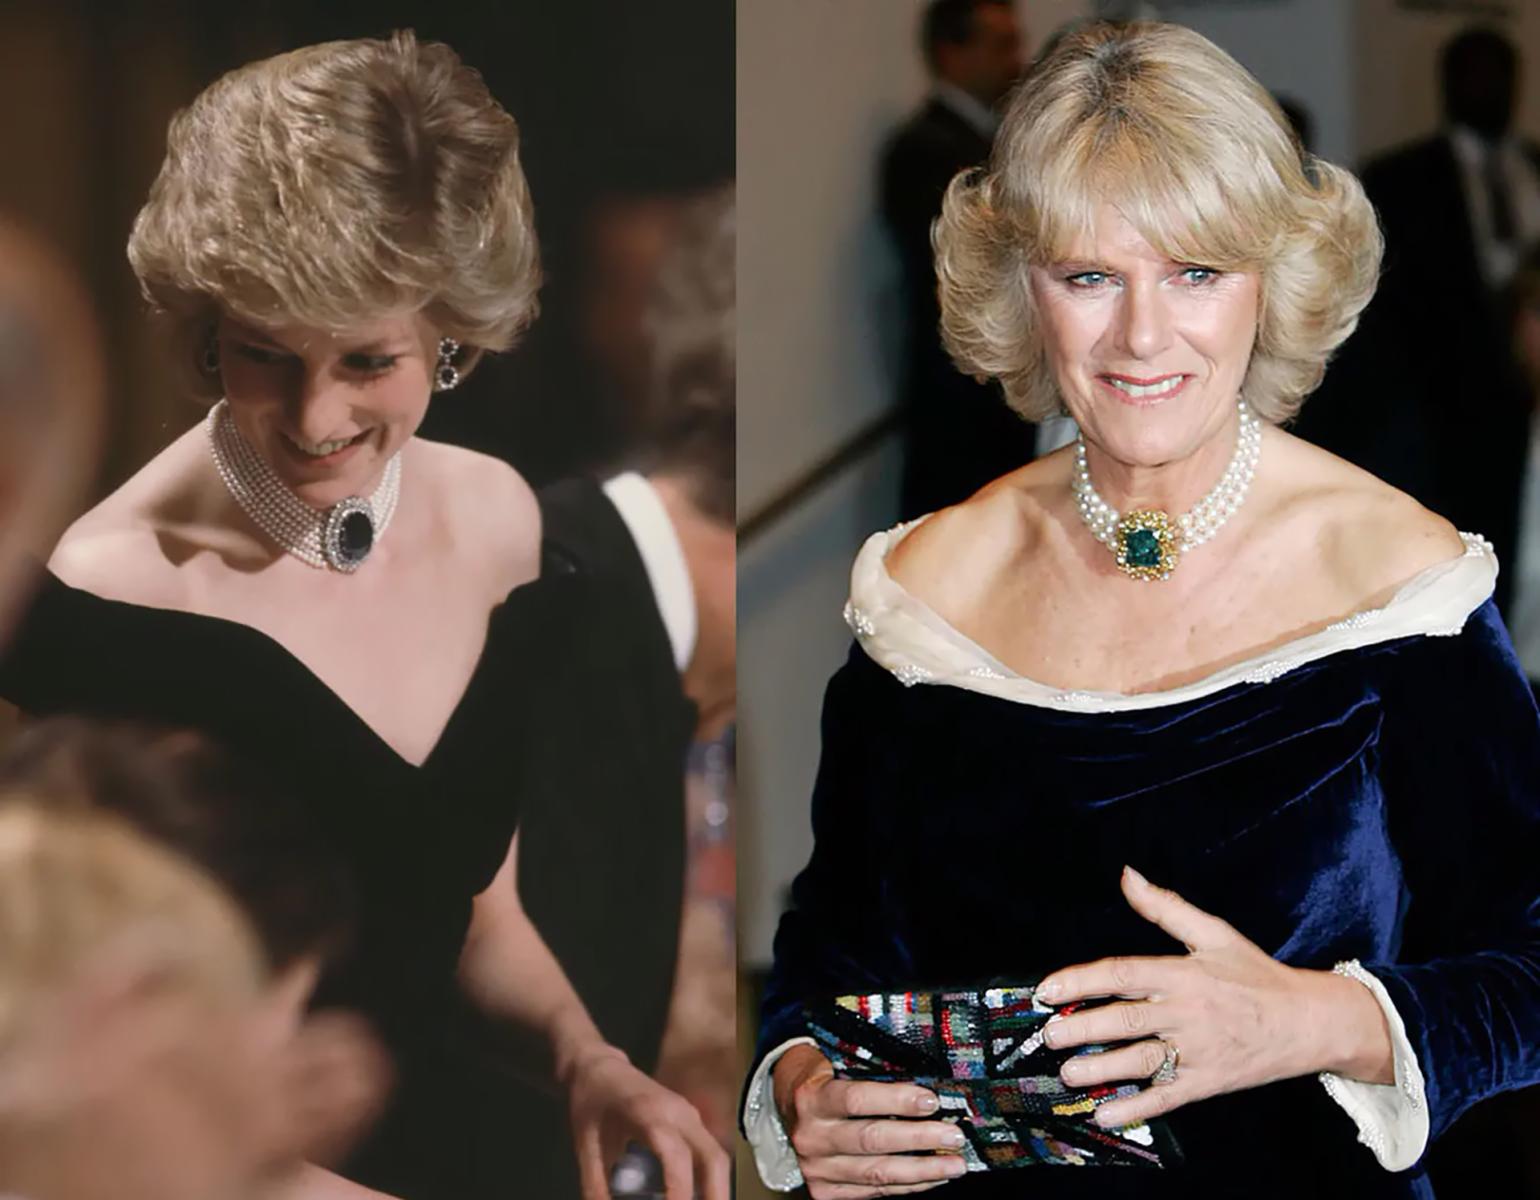 5 Times Camilla Parker Bowles Tried Copying Diana, and Failed - image 4